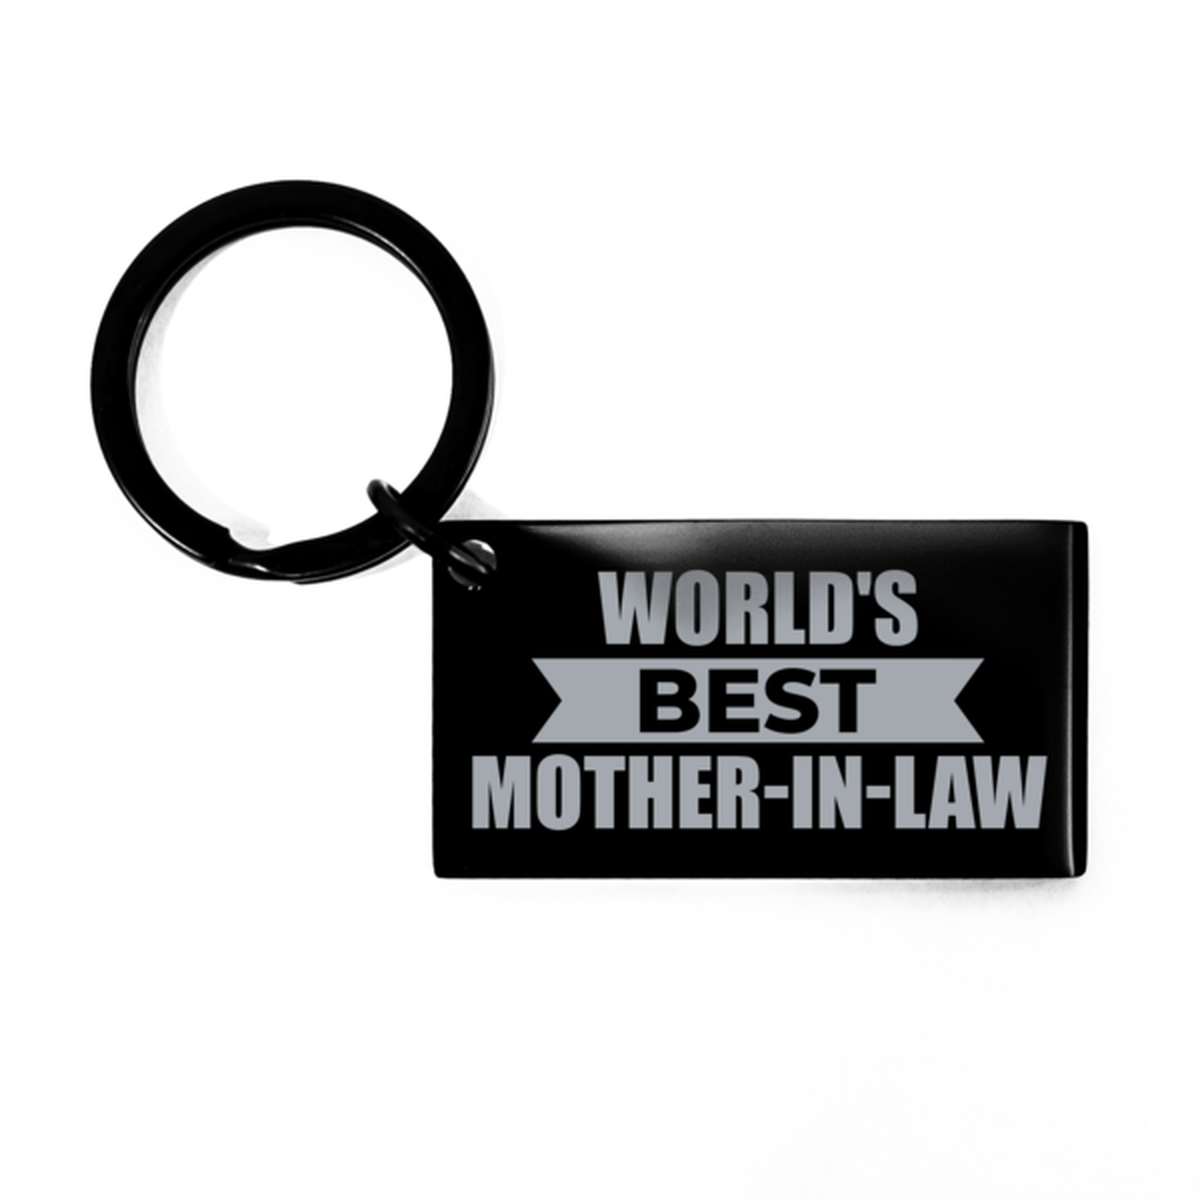 Worlds Best Mother-in-law Gifts, Funny Black Engraved Keychain For Mother-in-law, Birthday Presents For Women